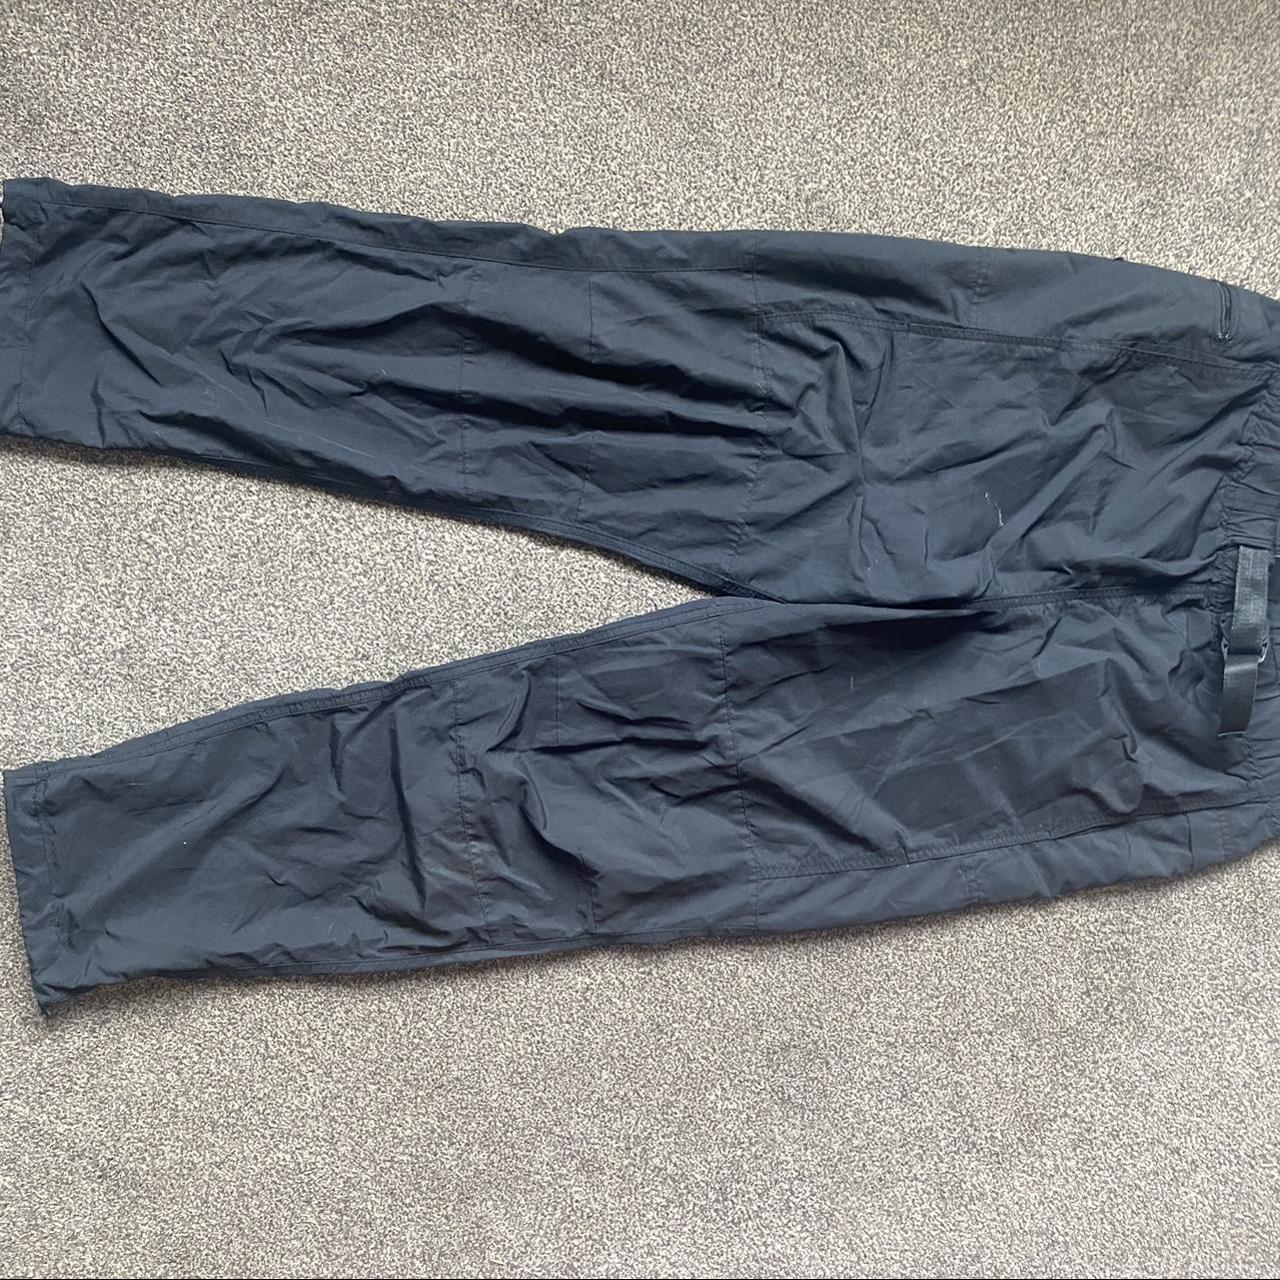 Vintage Stussy Cargo trousers with 2 bum pockets and... - Depop